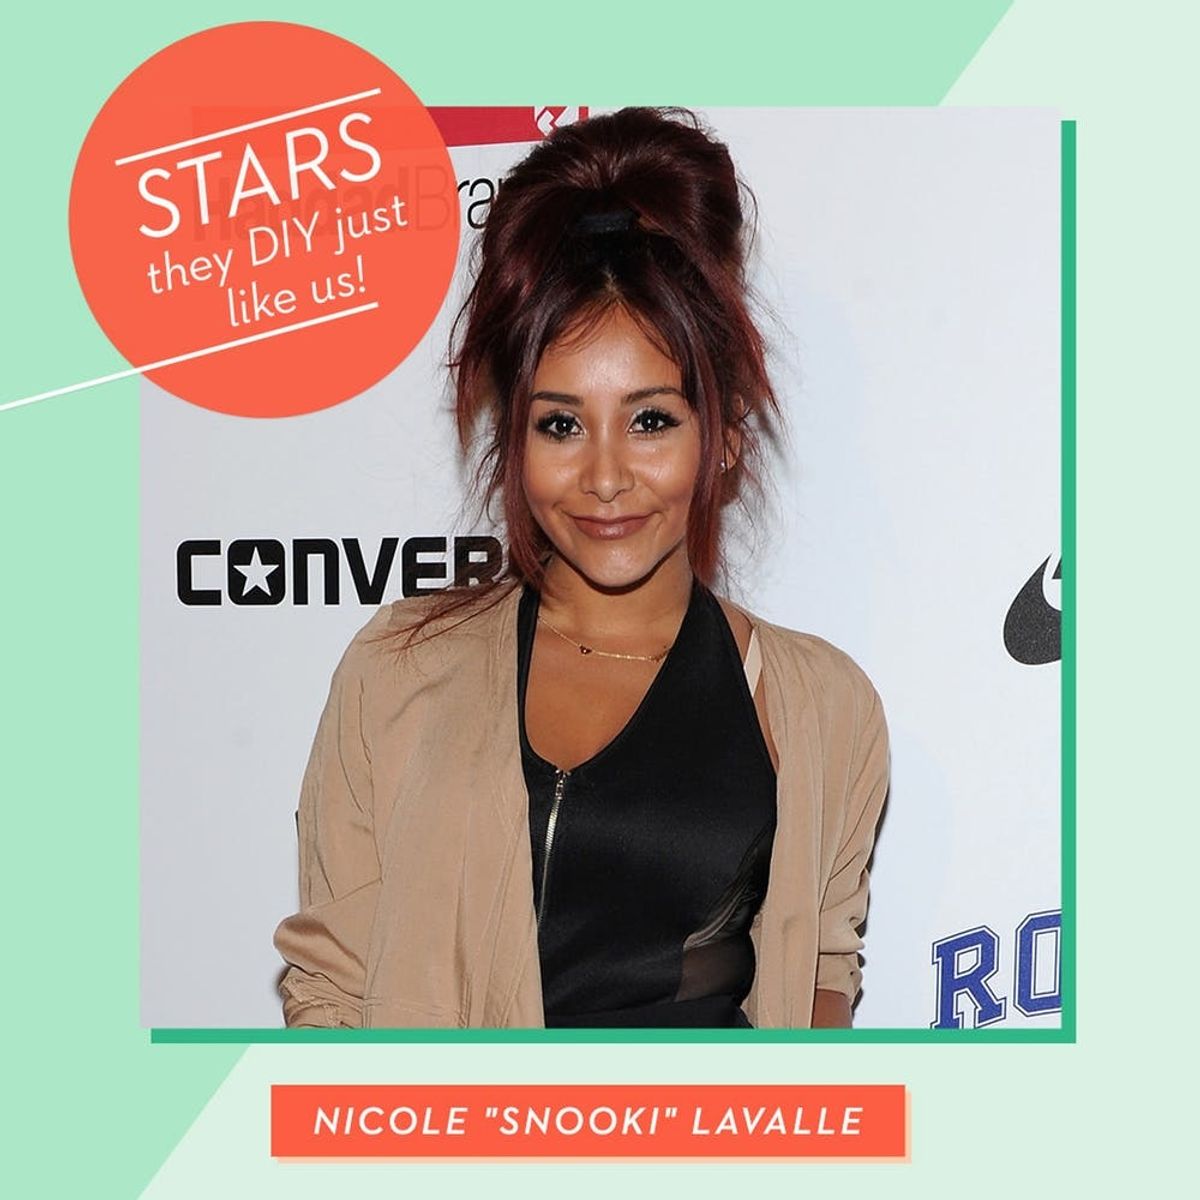 You Won’t Believe How Nicole “Snooki” LaValle Became an Etsy Star